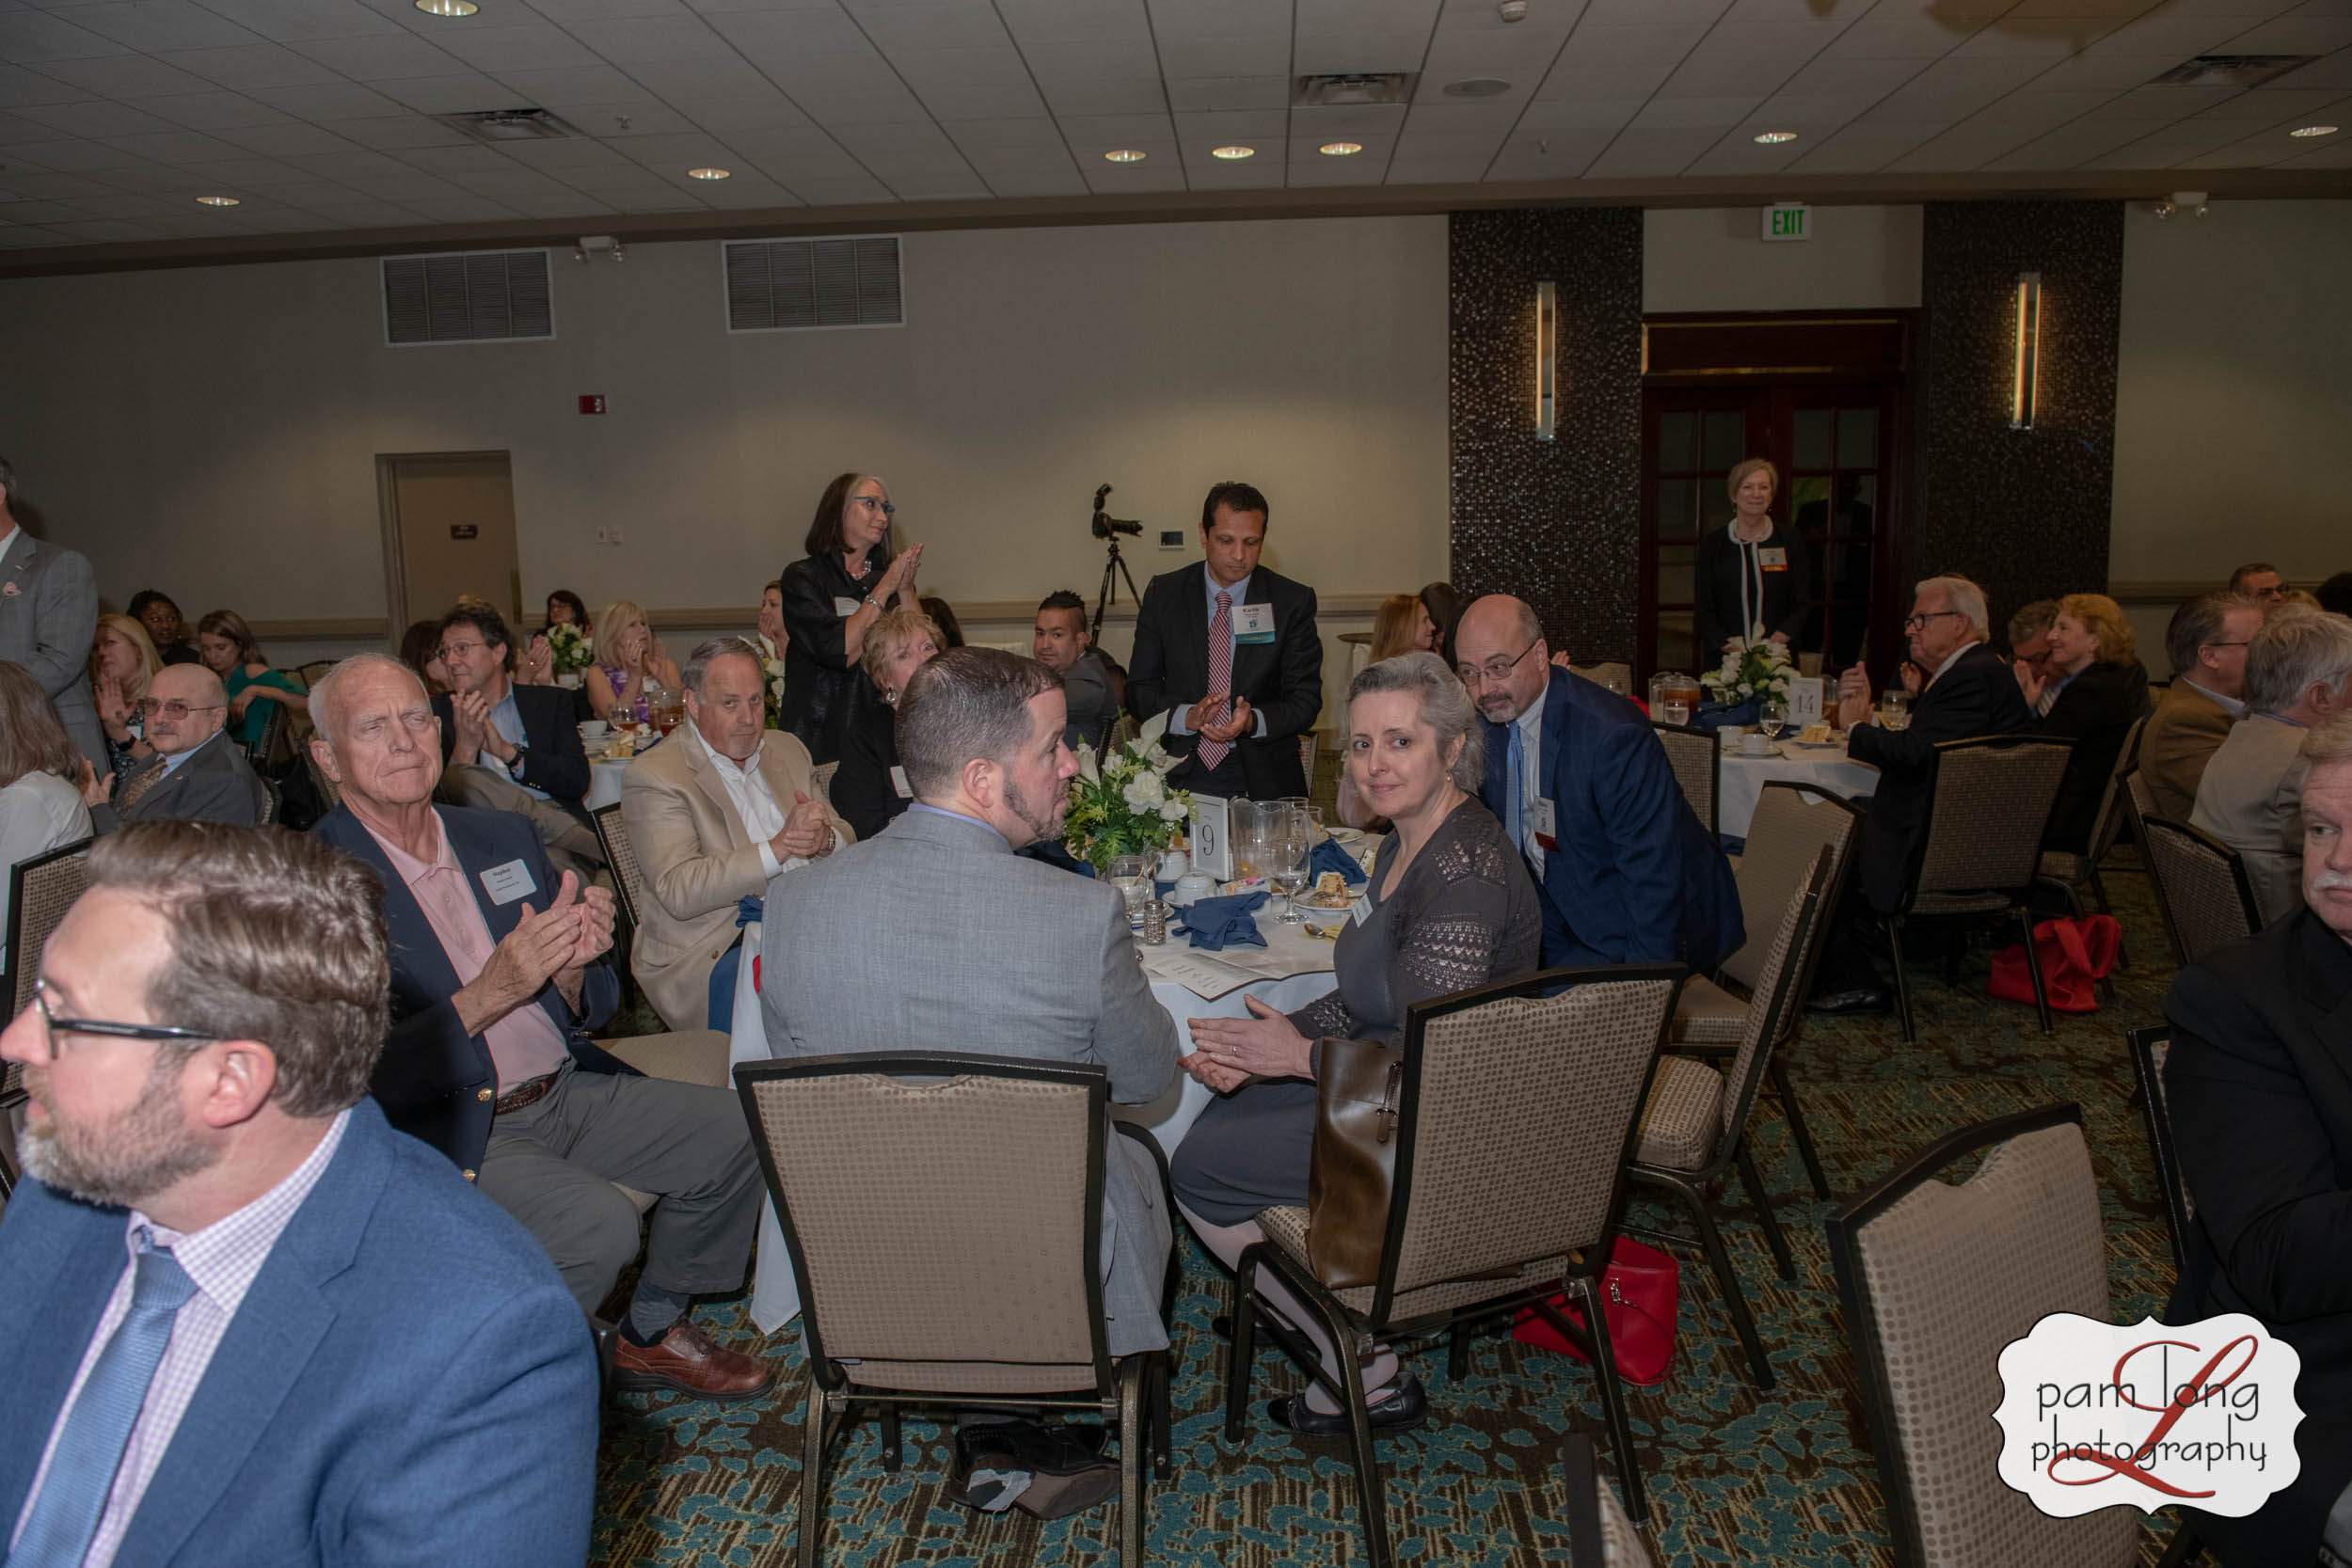 Pam-Long-Photography-HoCo-Chamber-50th-2019-93